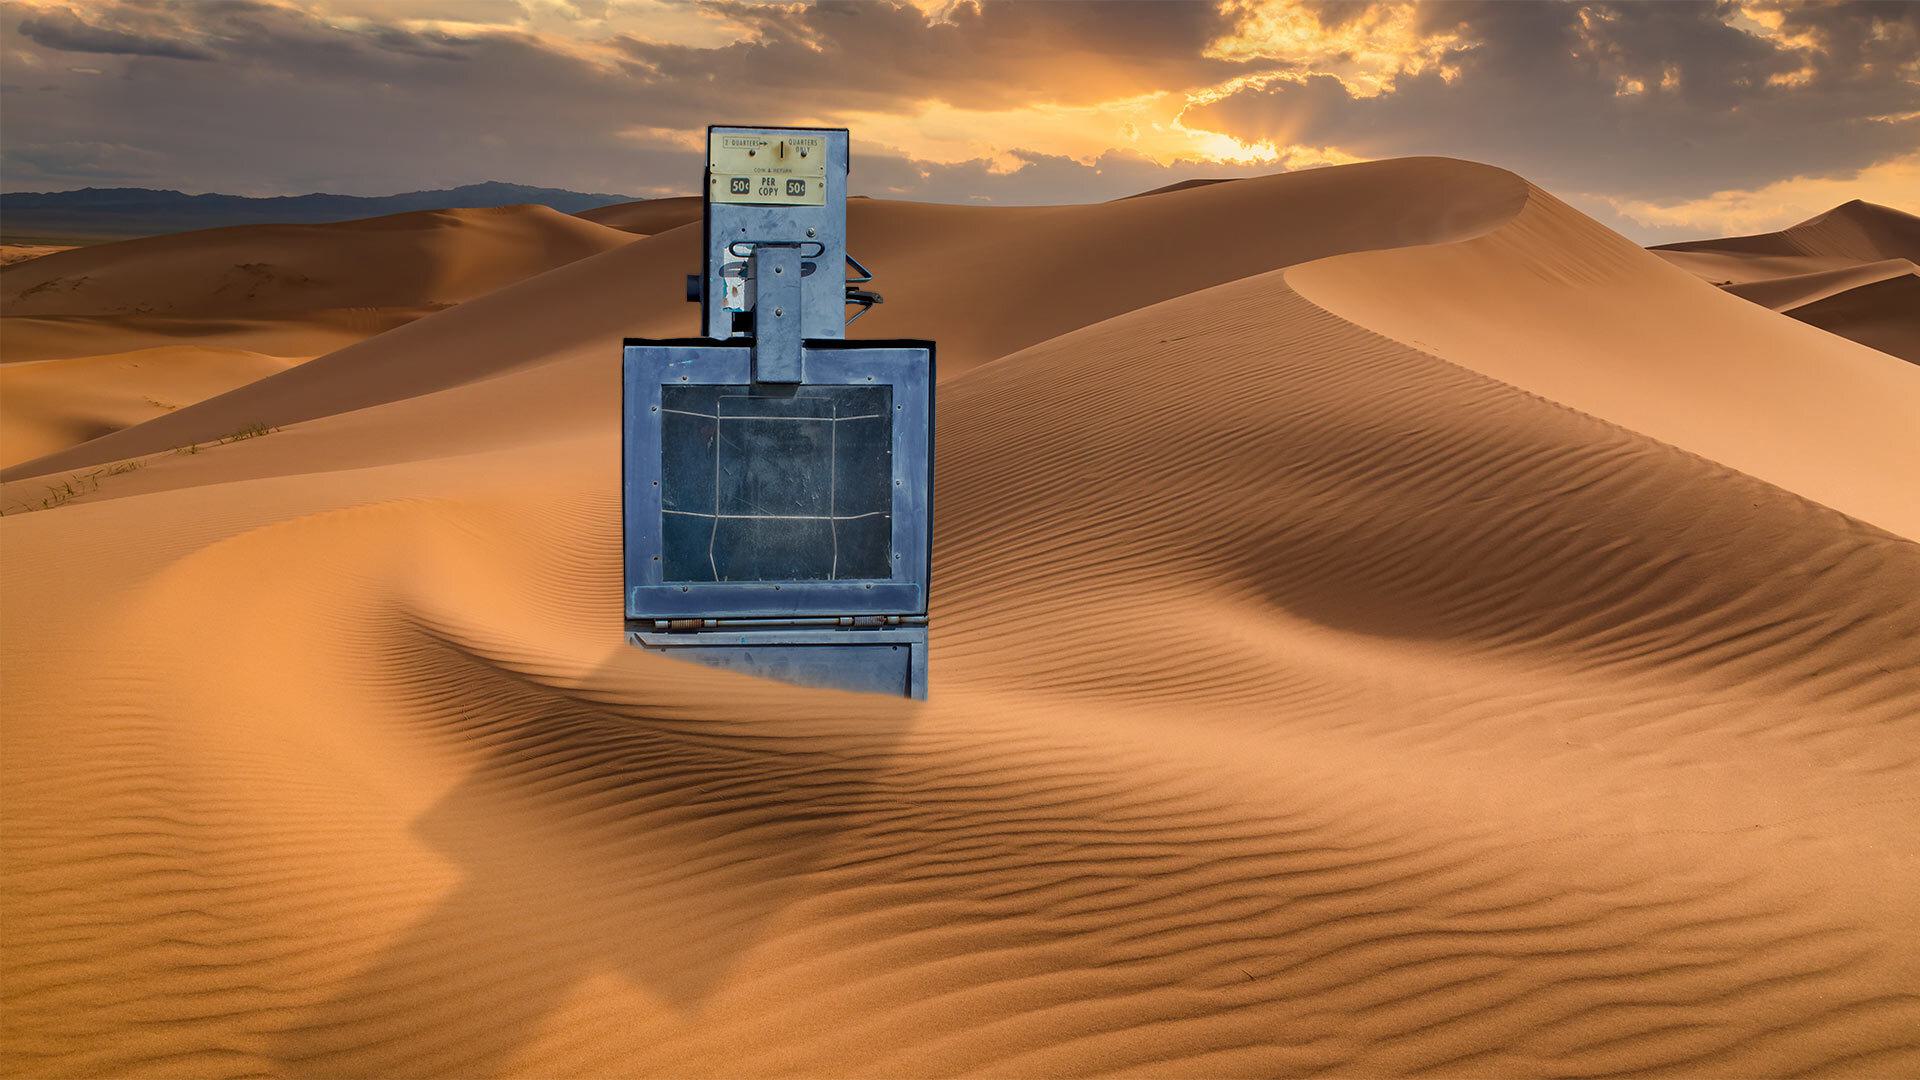 news stand in a desert